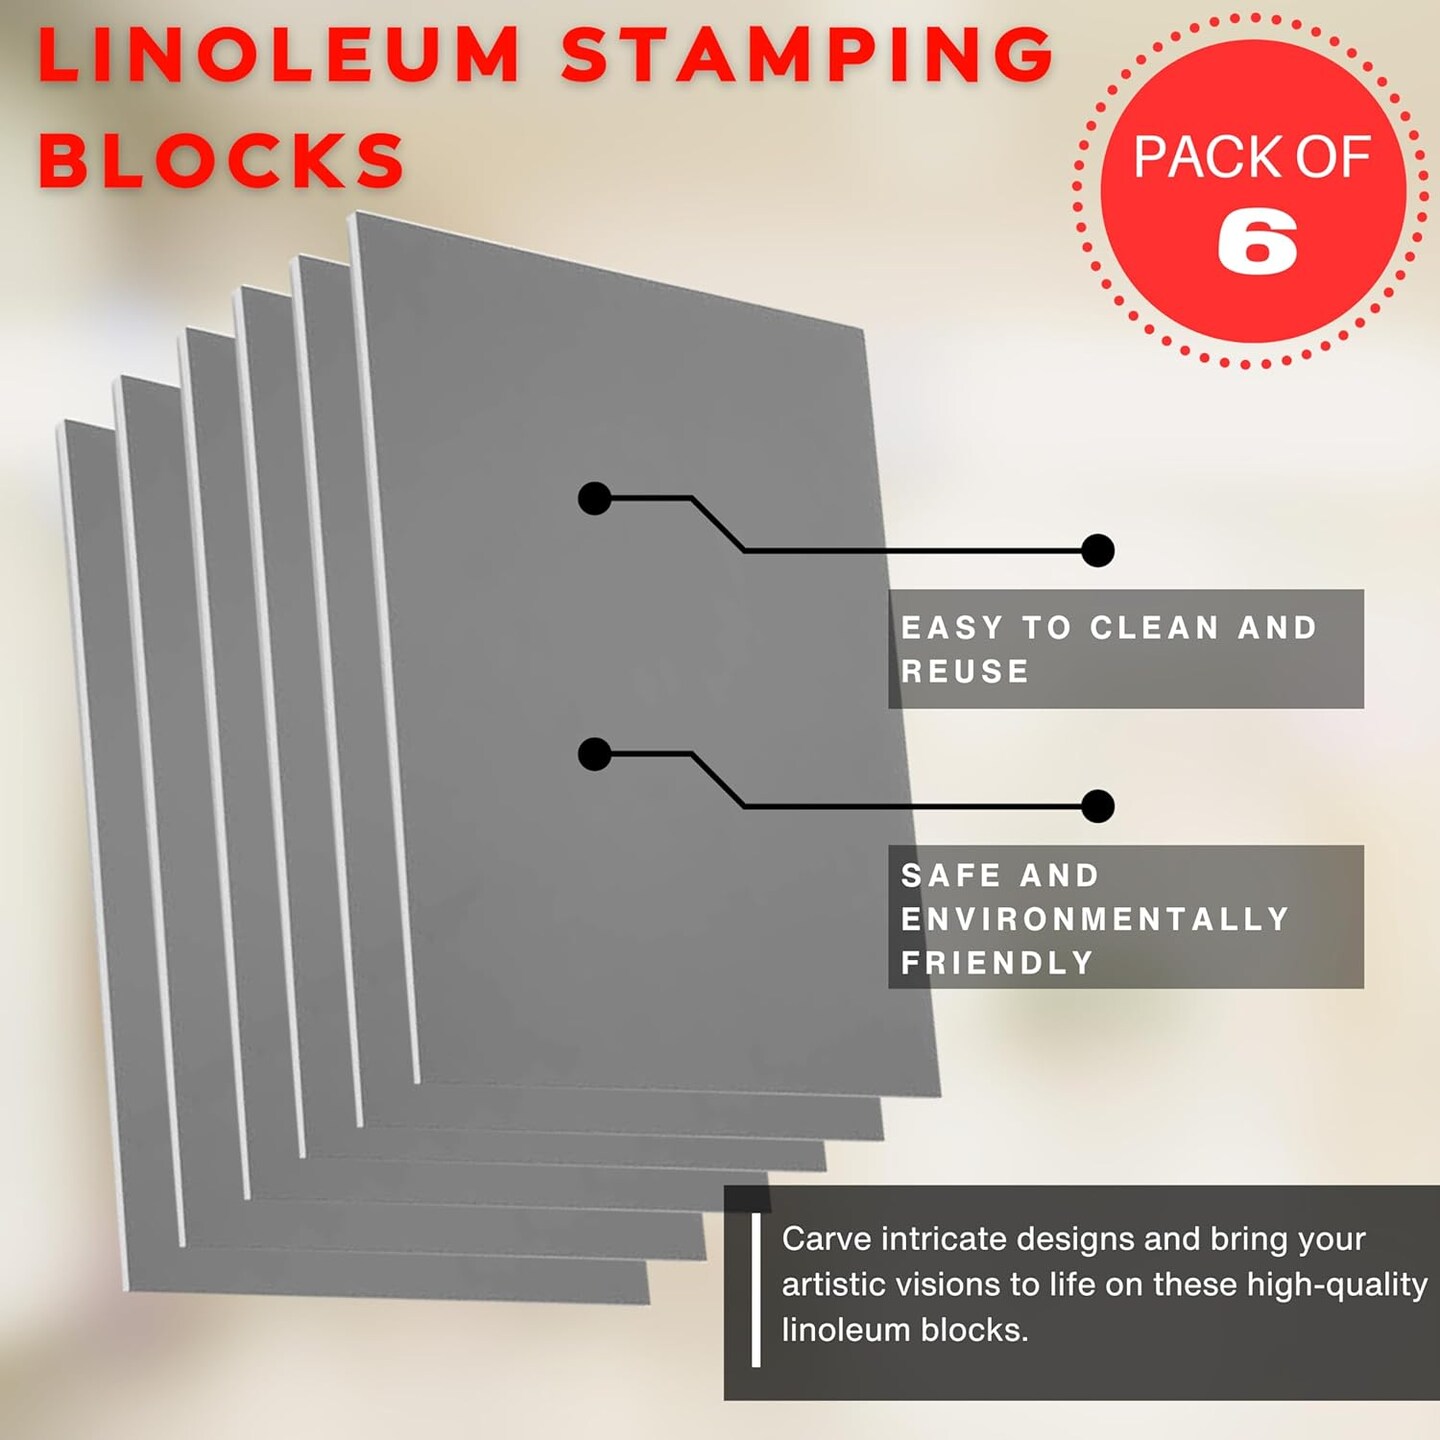 Linoleum Blocks for Printmaking - Printmaking Supplies from Pixiss -  Linocut Rubber Stamps (3 Pack) 8